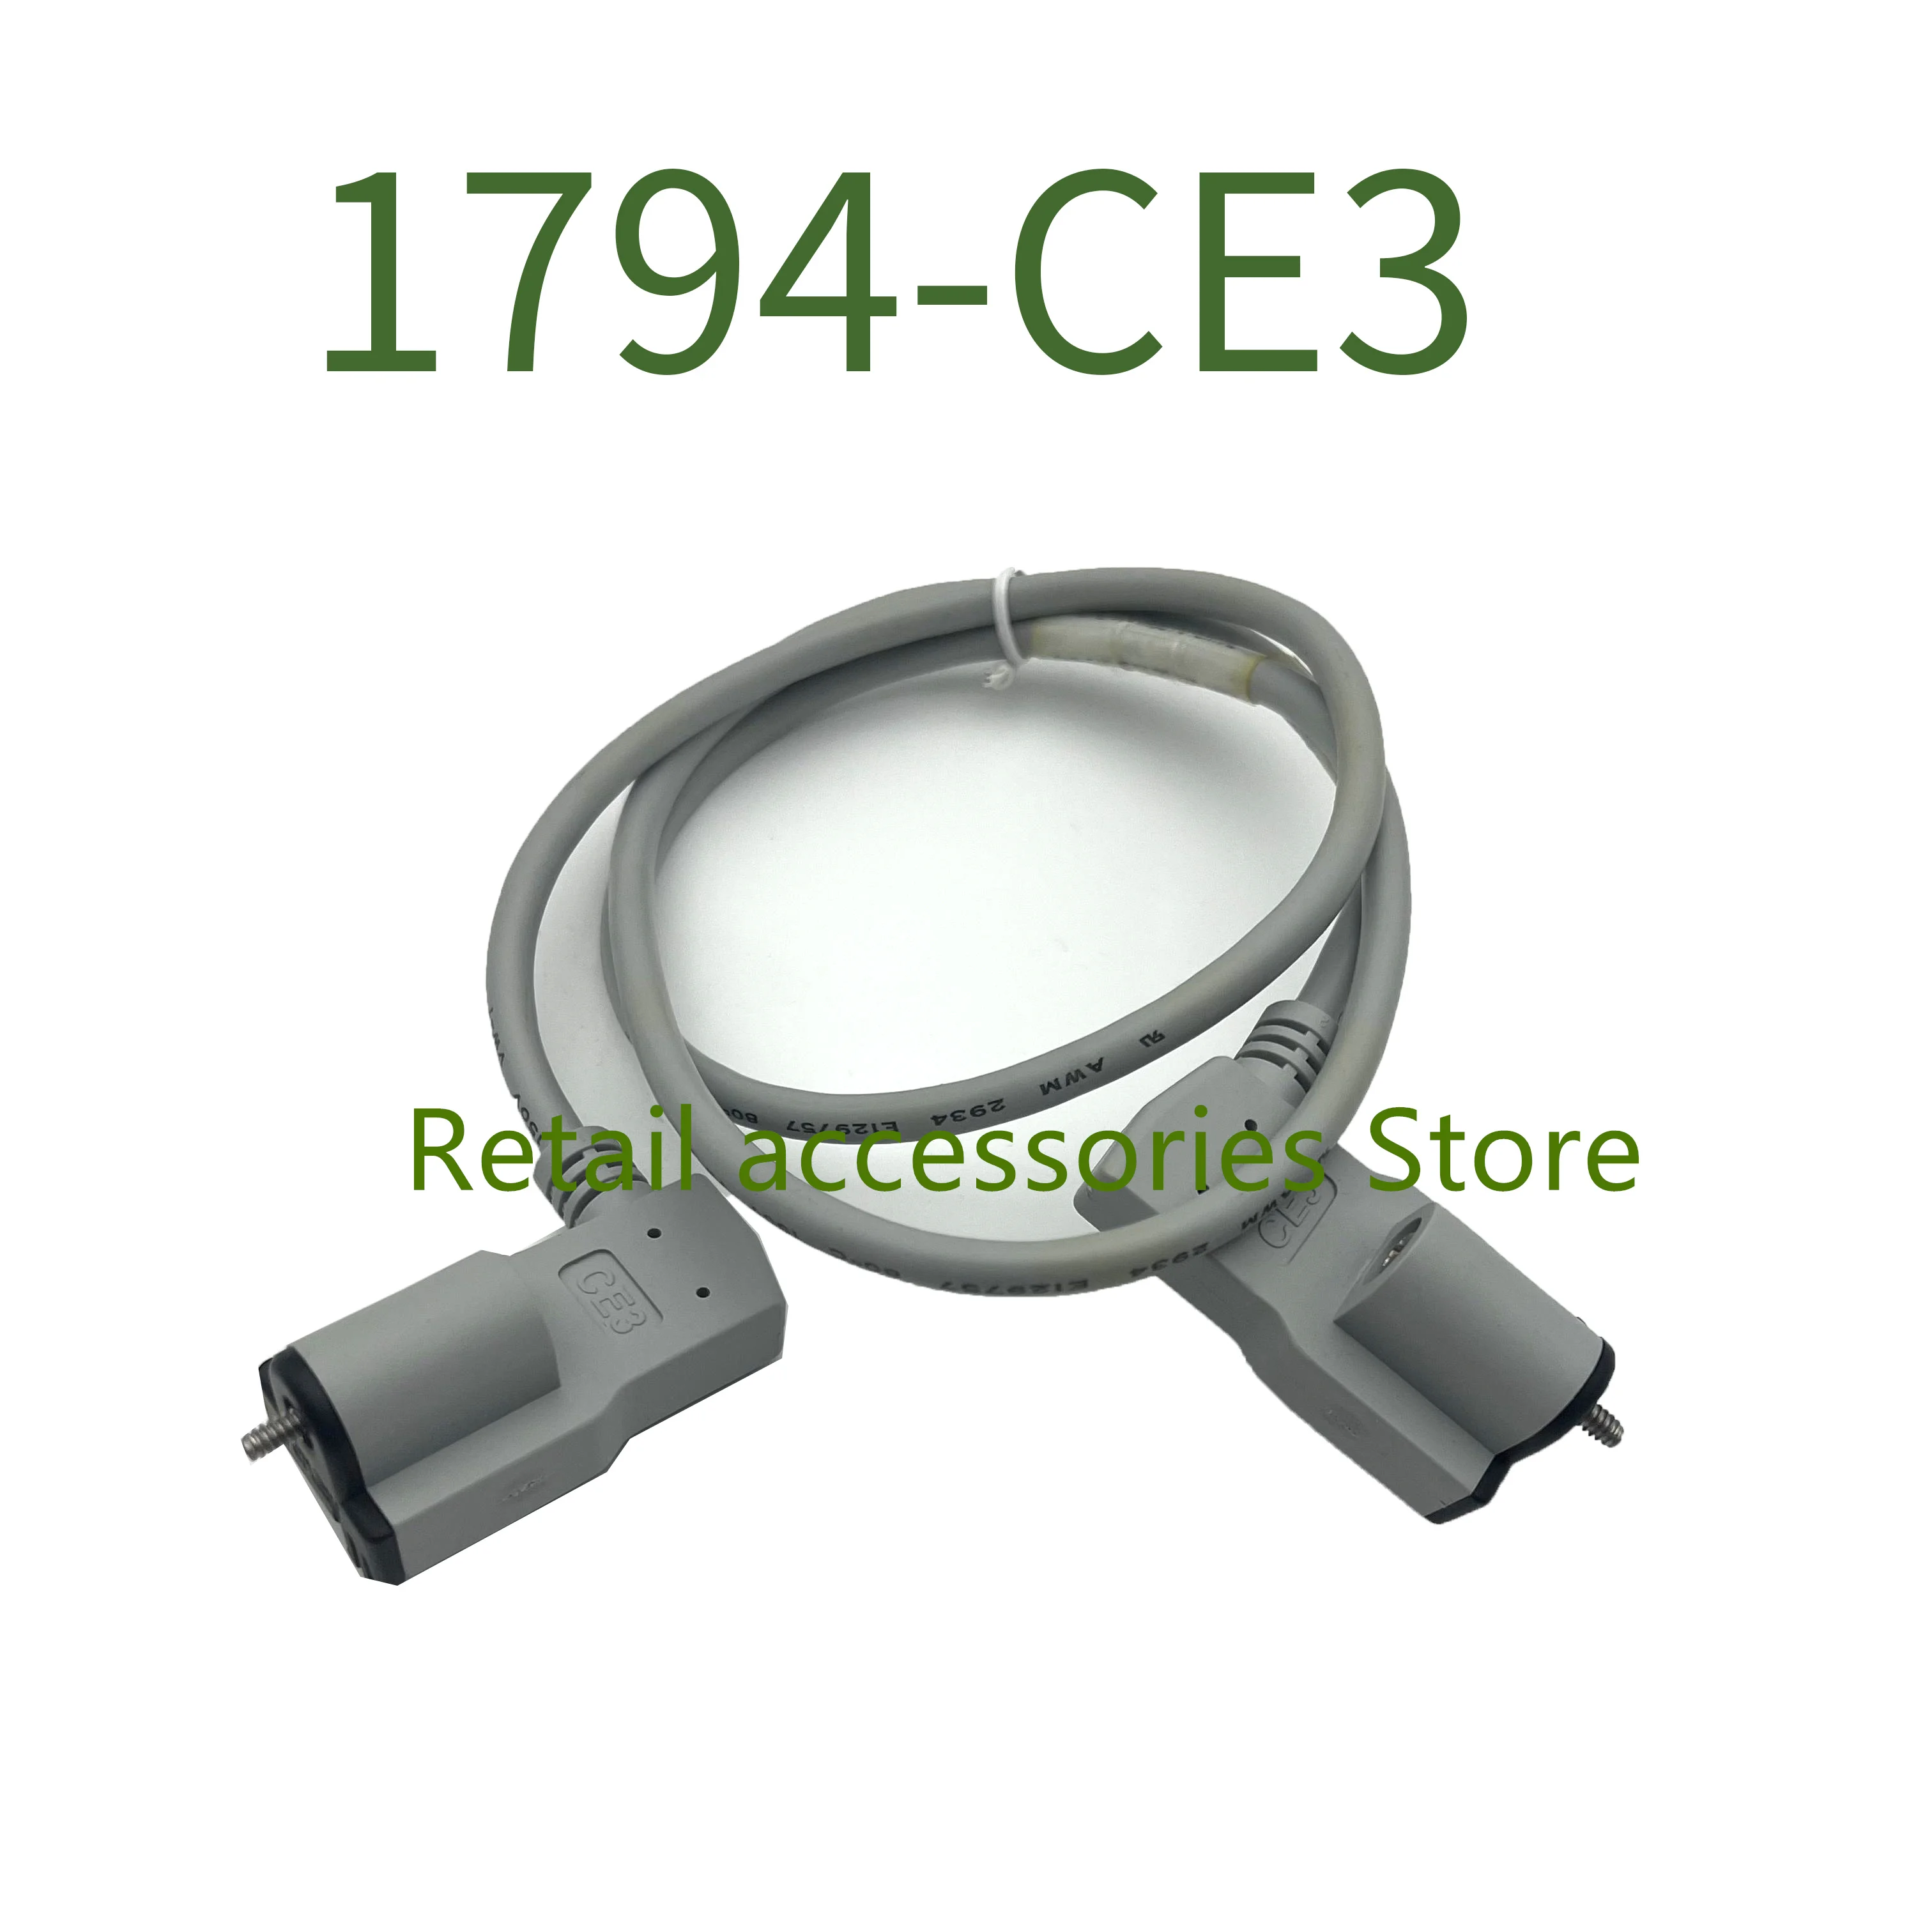 

New Original In BOX 1794-CE3 {Warehouse stock} 1 Year Warranty Shipment within 24 hours